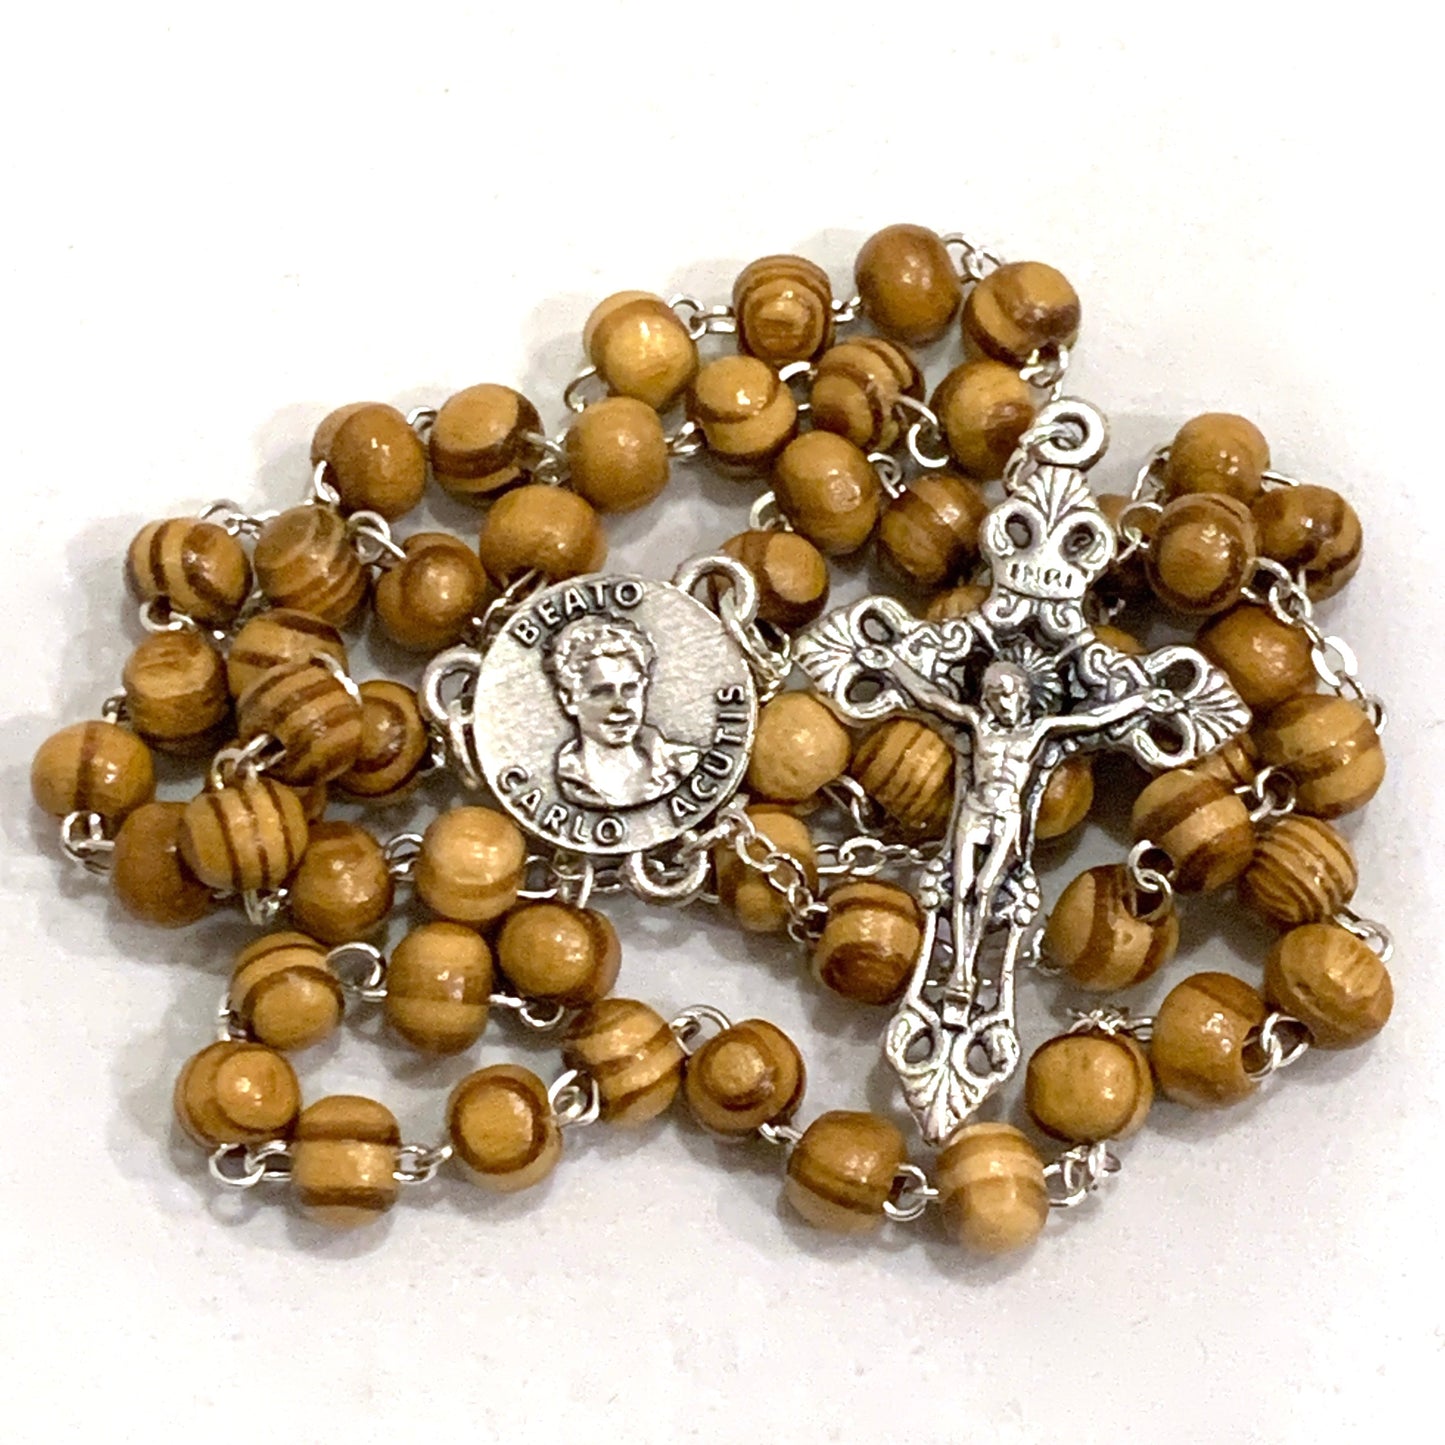 Bl. Carlo Acutis Rosary with Relic